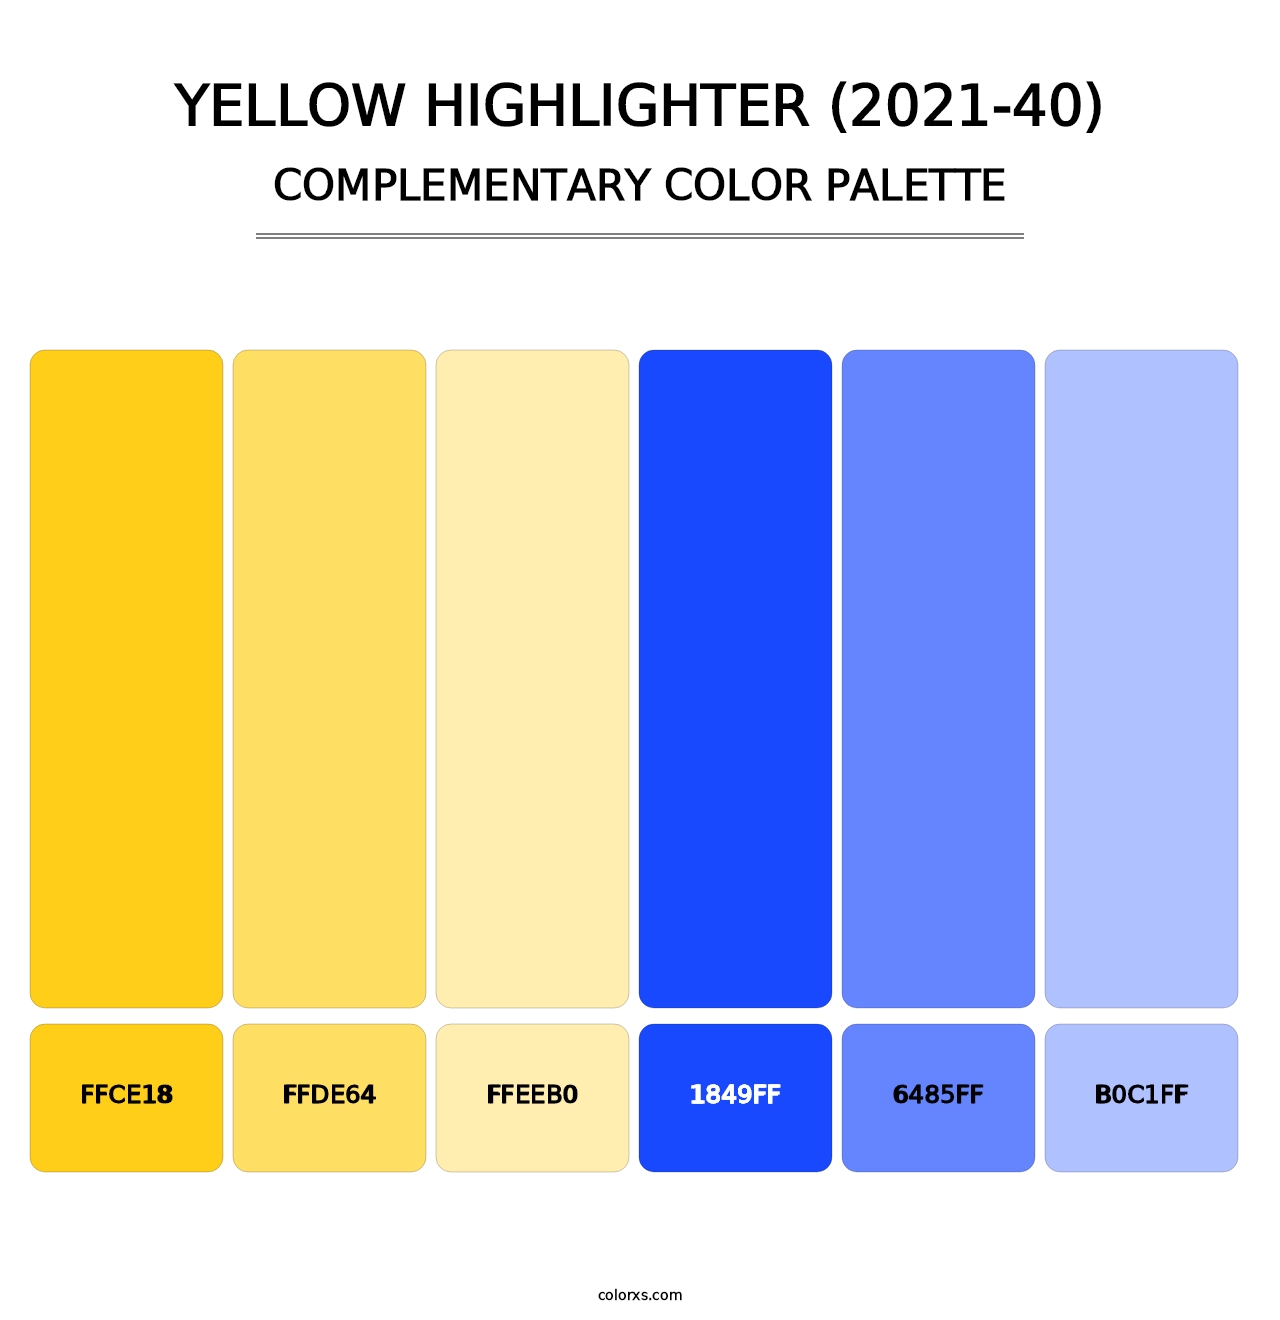 Yellow Highlighter (2021-40) - Complementary Color Palette